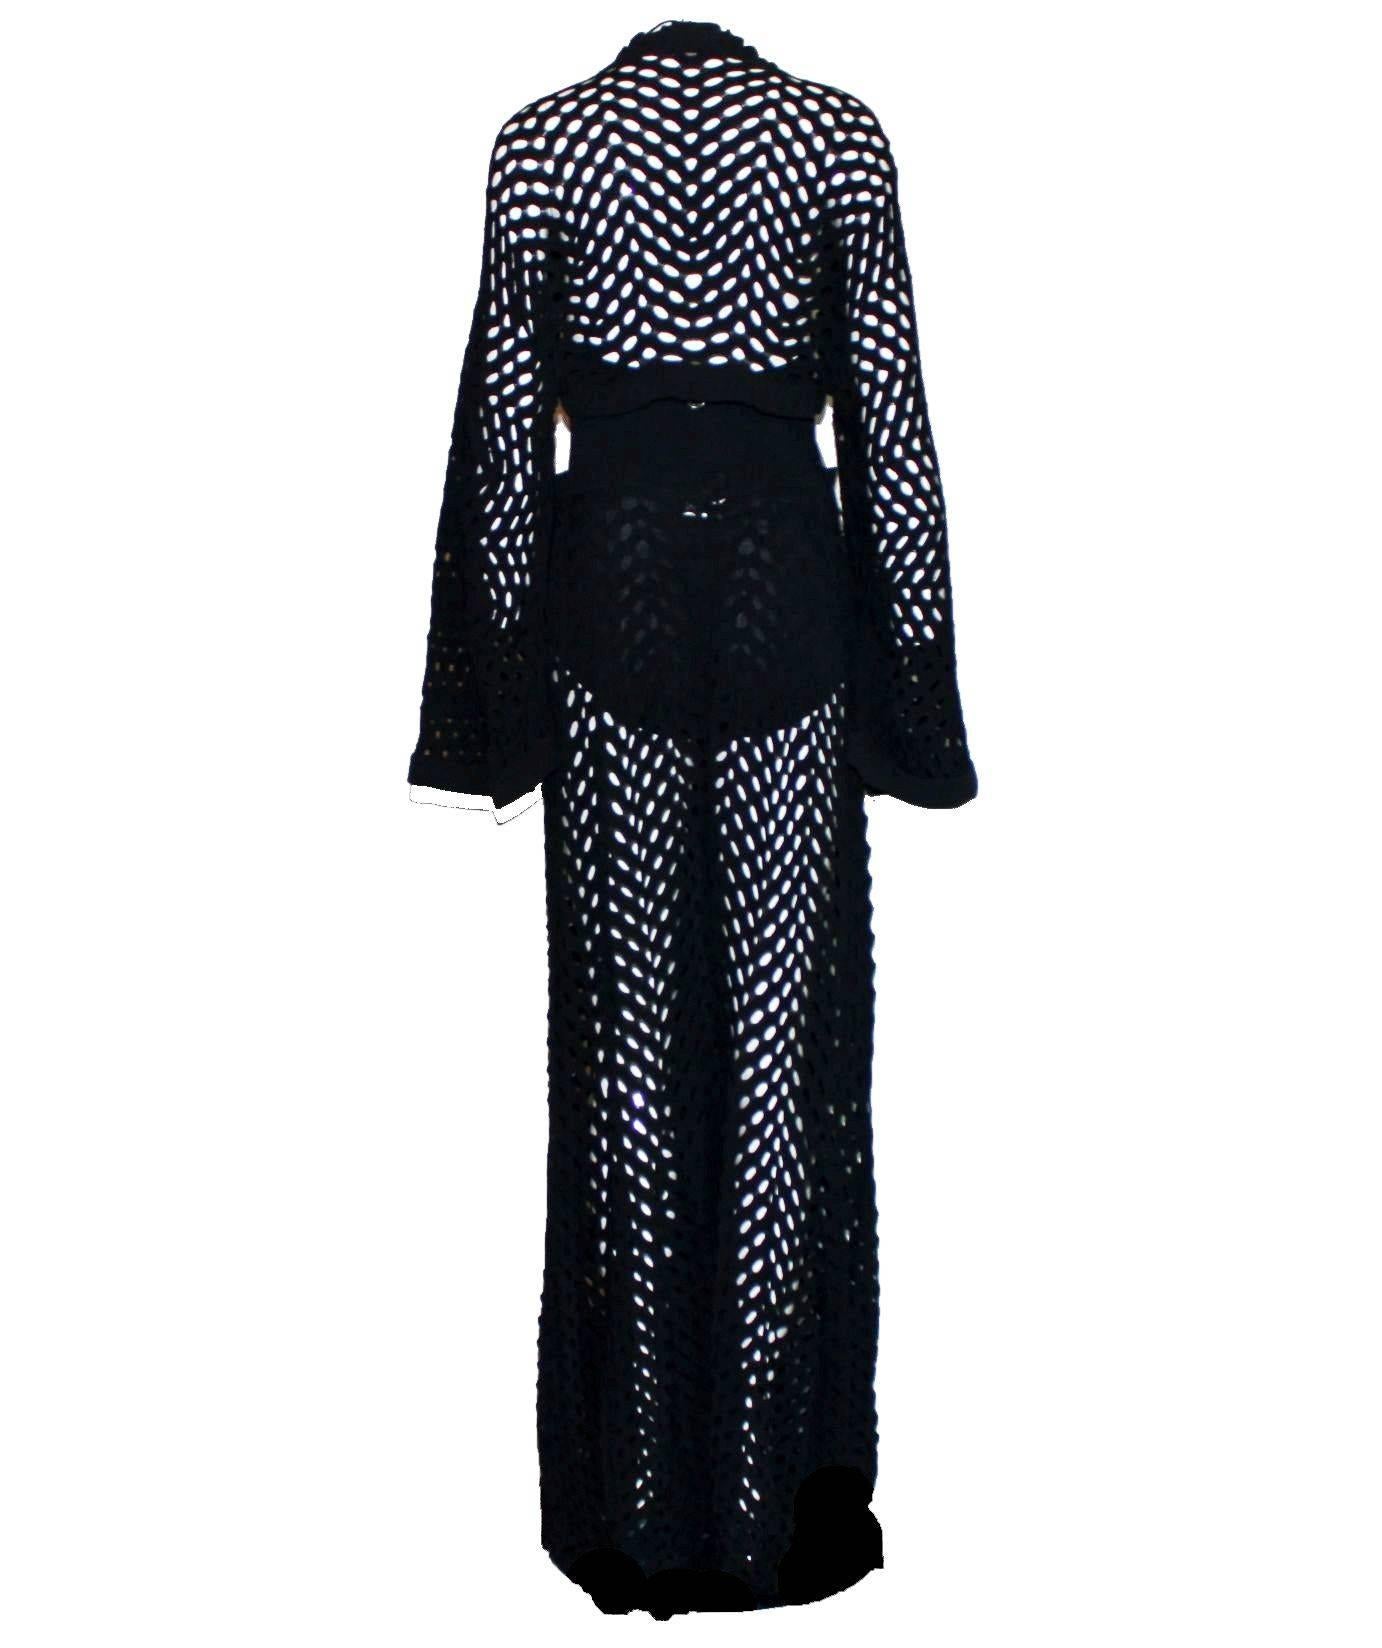 An absolutely stunning and timeless Chanel ensemble
Consisting of three pieces: Swimsuit/Bodysuit, pants and jacket
Softest black crochet knit
Beautiful shaped wide-leg pants
Cardigan with amazing batwing sleeves
Matching swimsuit with neckholder,